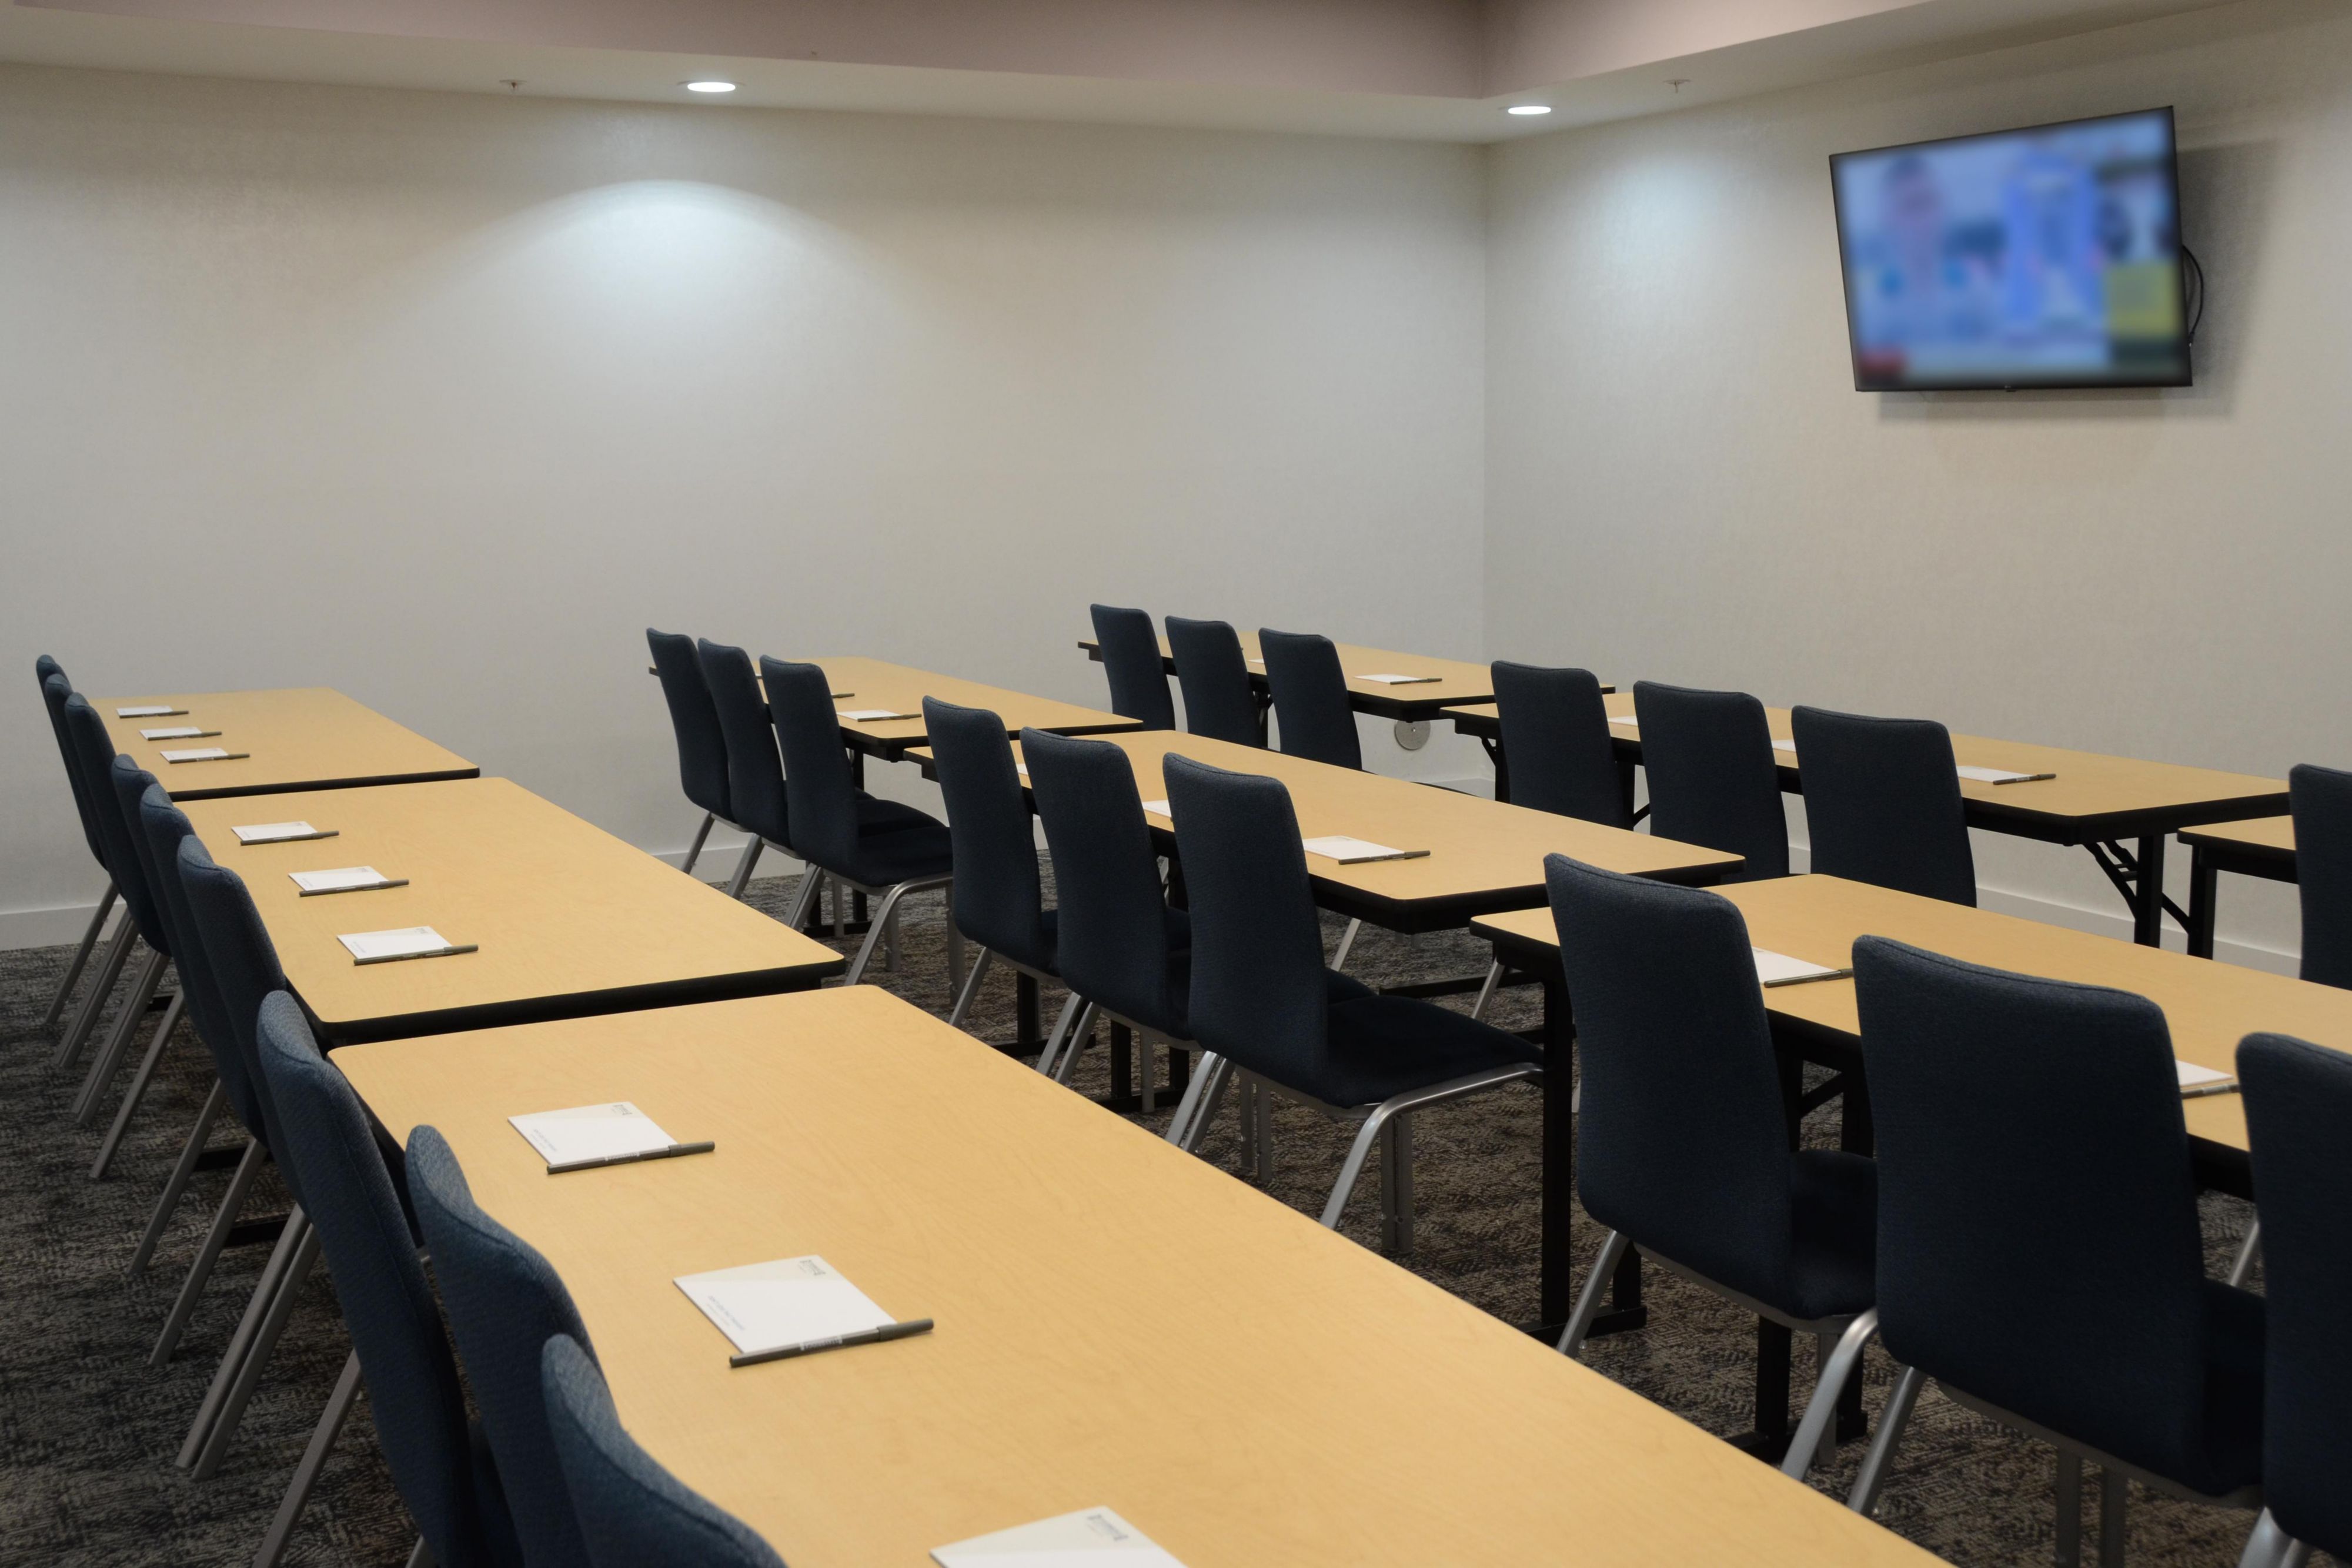 Host corporate meetings, reunions, and social gatherings for up to 27 people in 575 sq ft of flexible meeting space near Nashville. Our hotel offers a business center, A/V equipment, free Wi-Fi, and group accommodations.